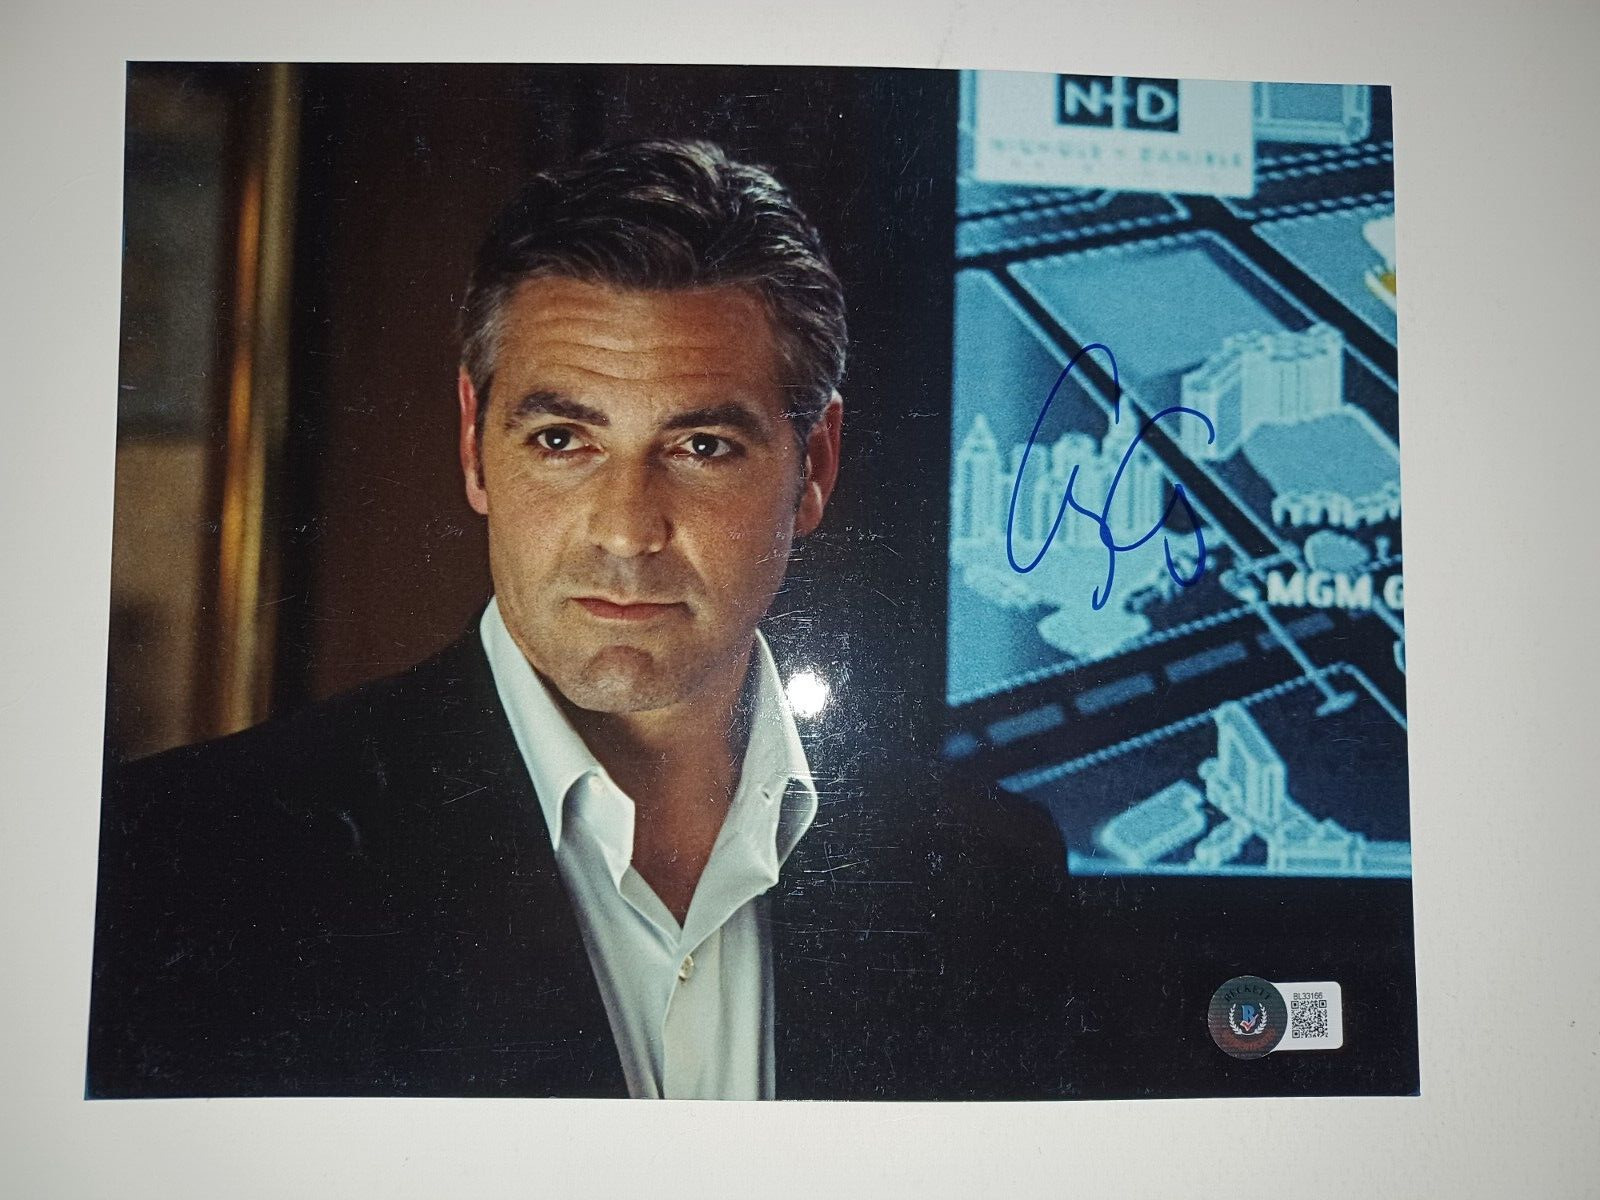 George Clooney Oceans 11 Signed Autographed 8x10 photo Beckett BAS